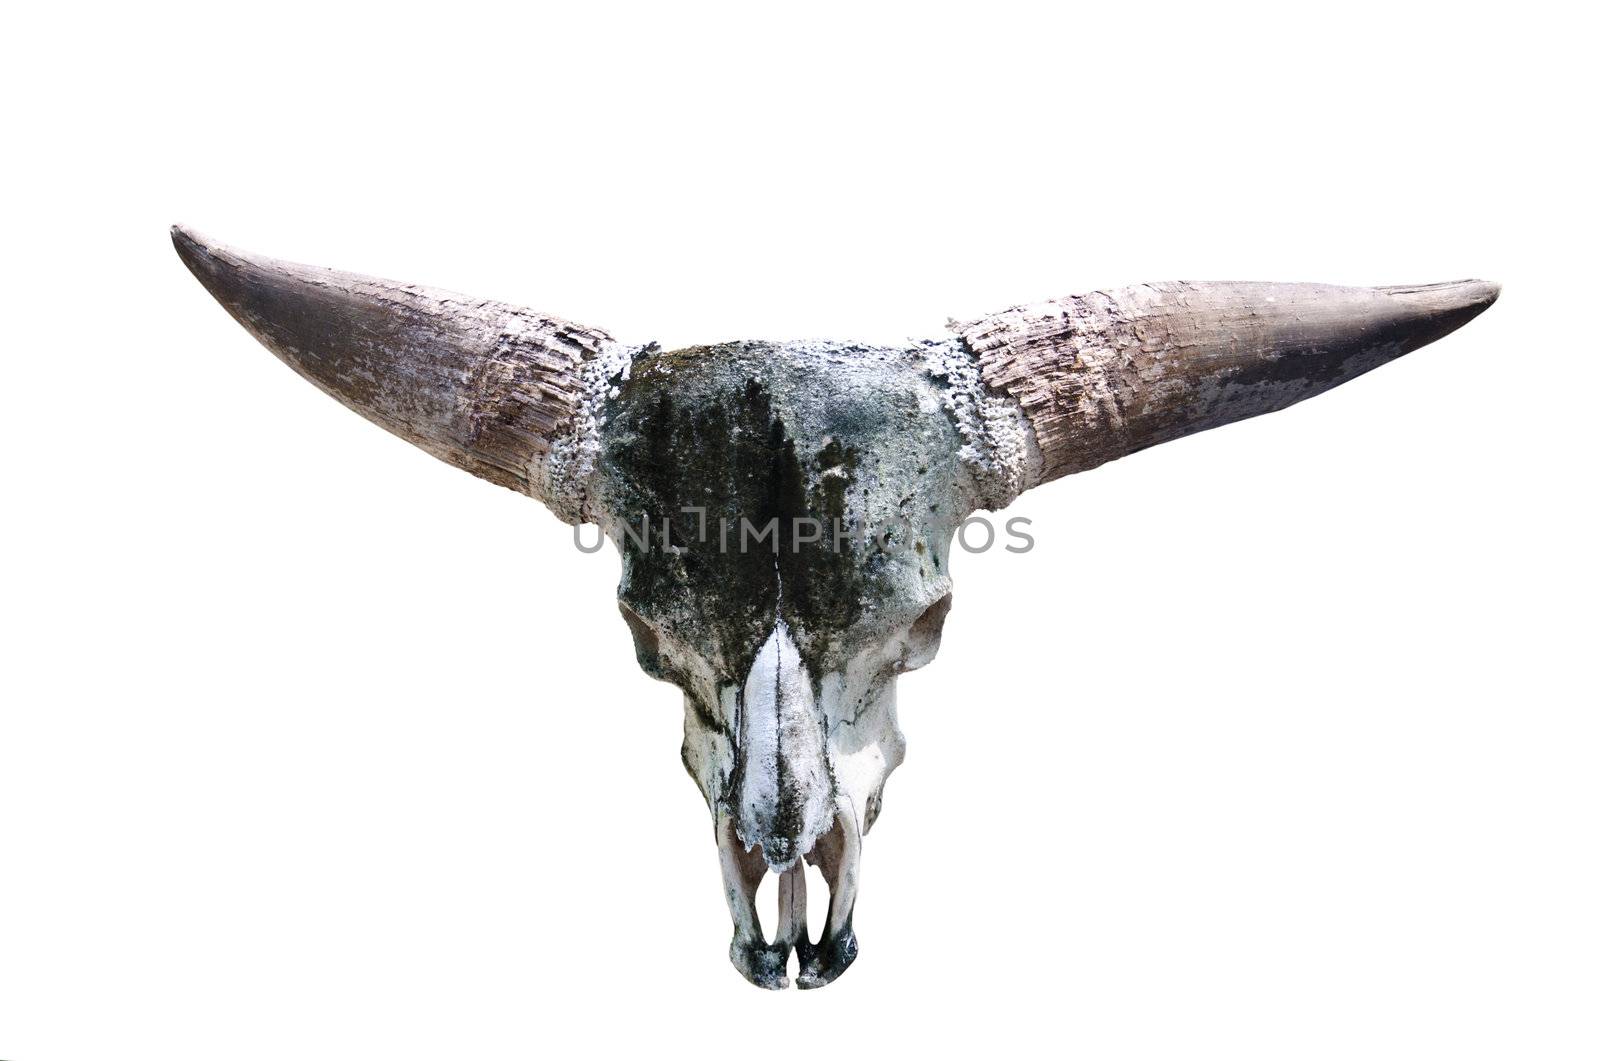 Skull of a bull. by chatchai